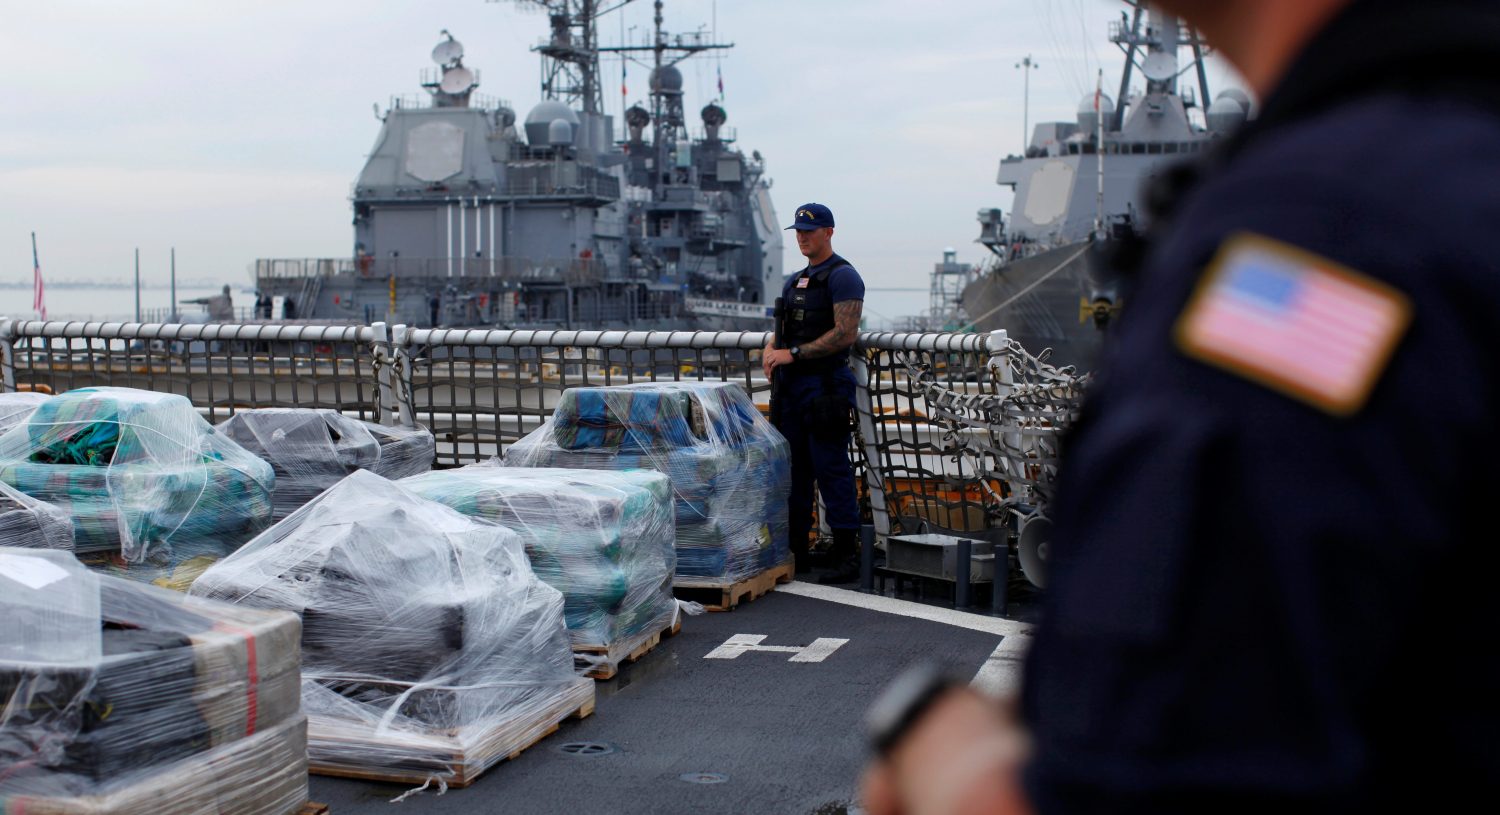 Armed U.S. Coast Guardsmen aboard the Coast Guard Cutter Waesche stand watch as more than 39,000 pounds of seized cocaine is offloaded at Naval Base San Diego, California, U.S., October 27, 2016. REUTERS/Mike Blake - RTX2QRU3